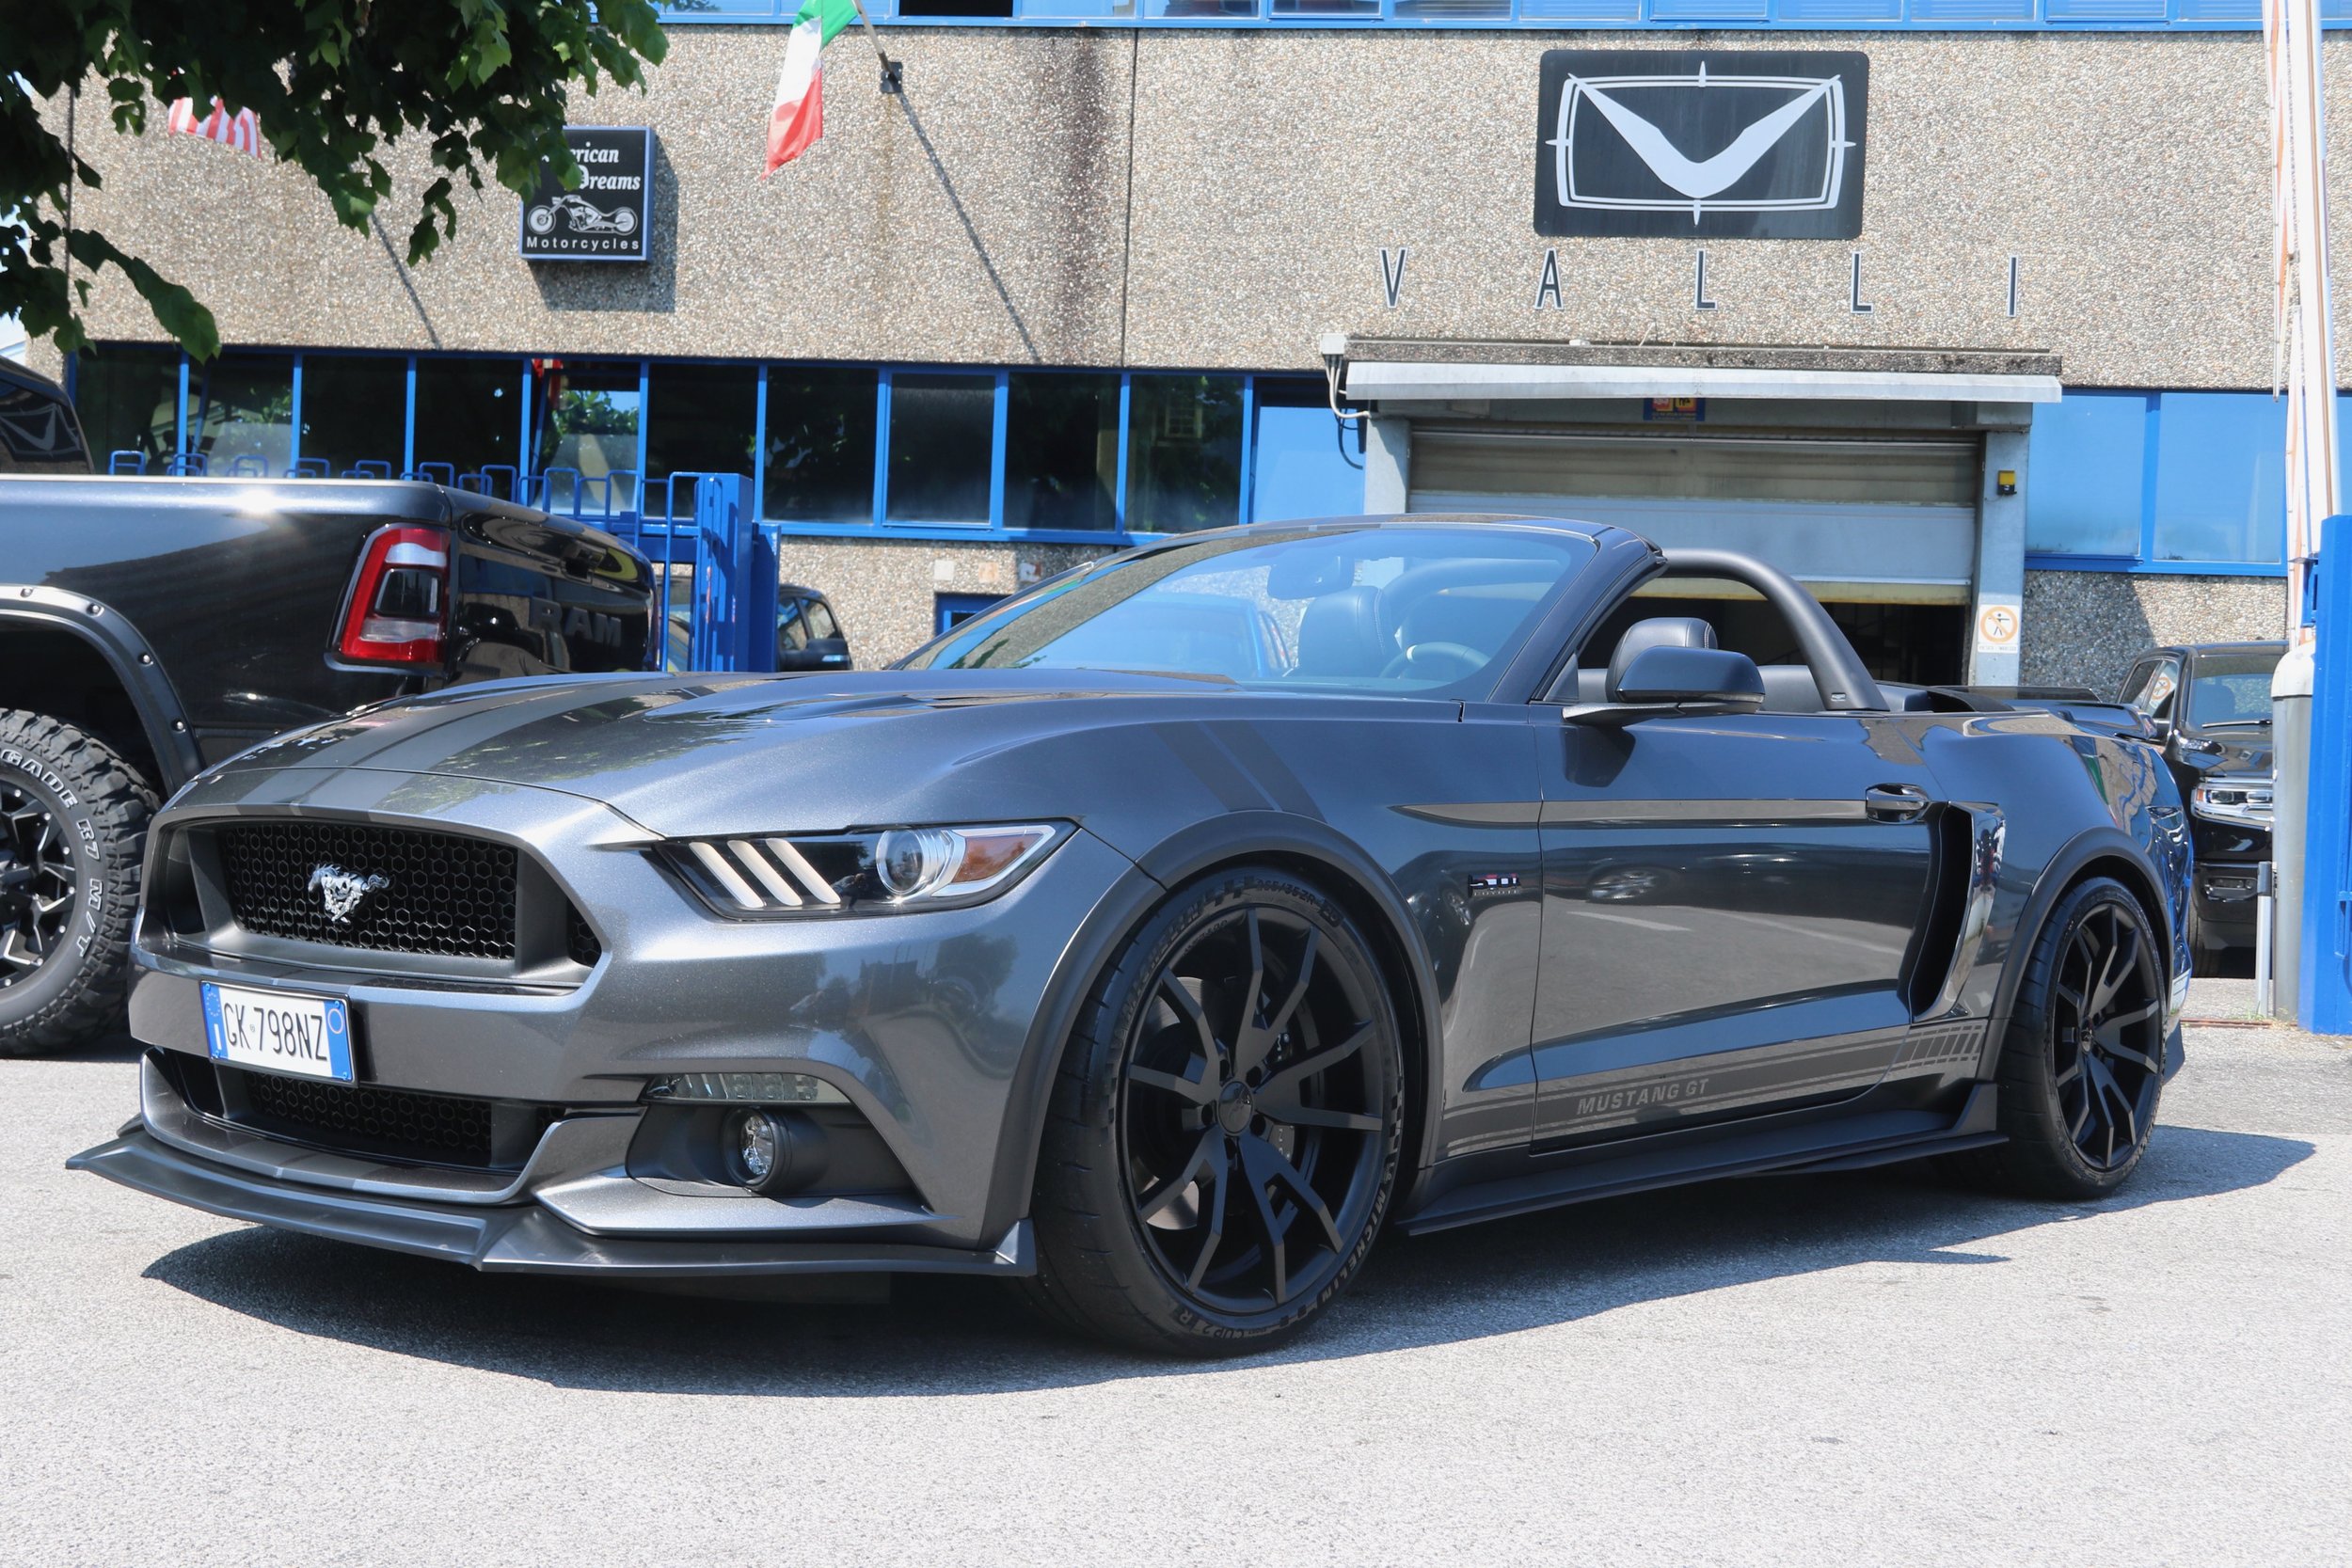 02 2015 Mustang GT 5.0L Coyote Convertible Marco Vignale.jpeg